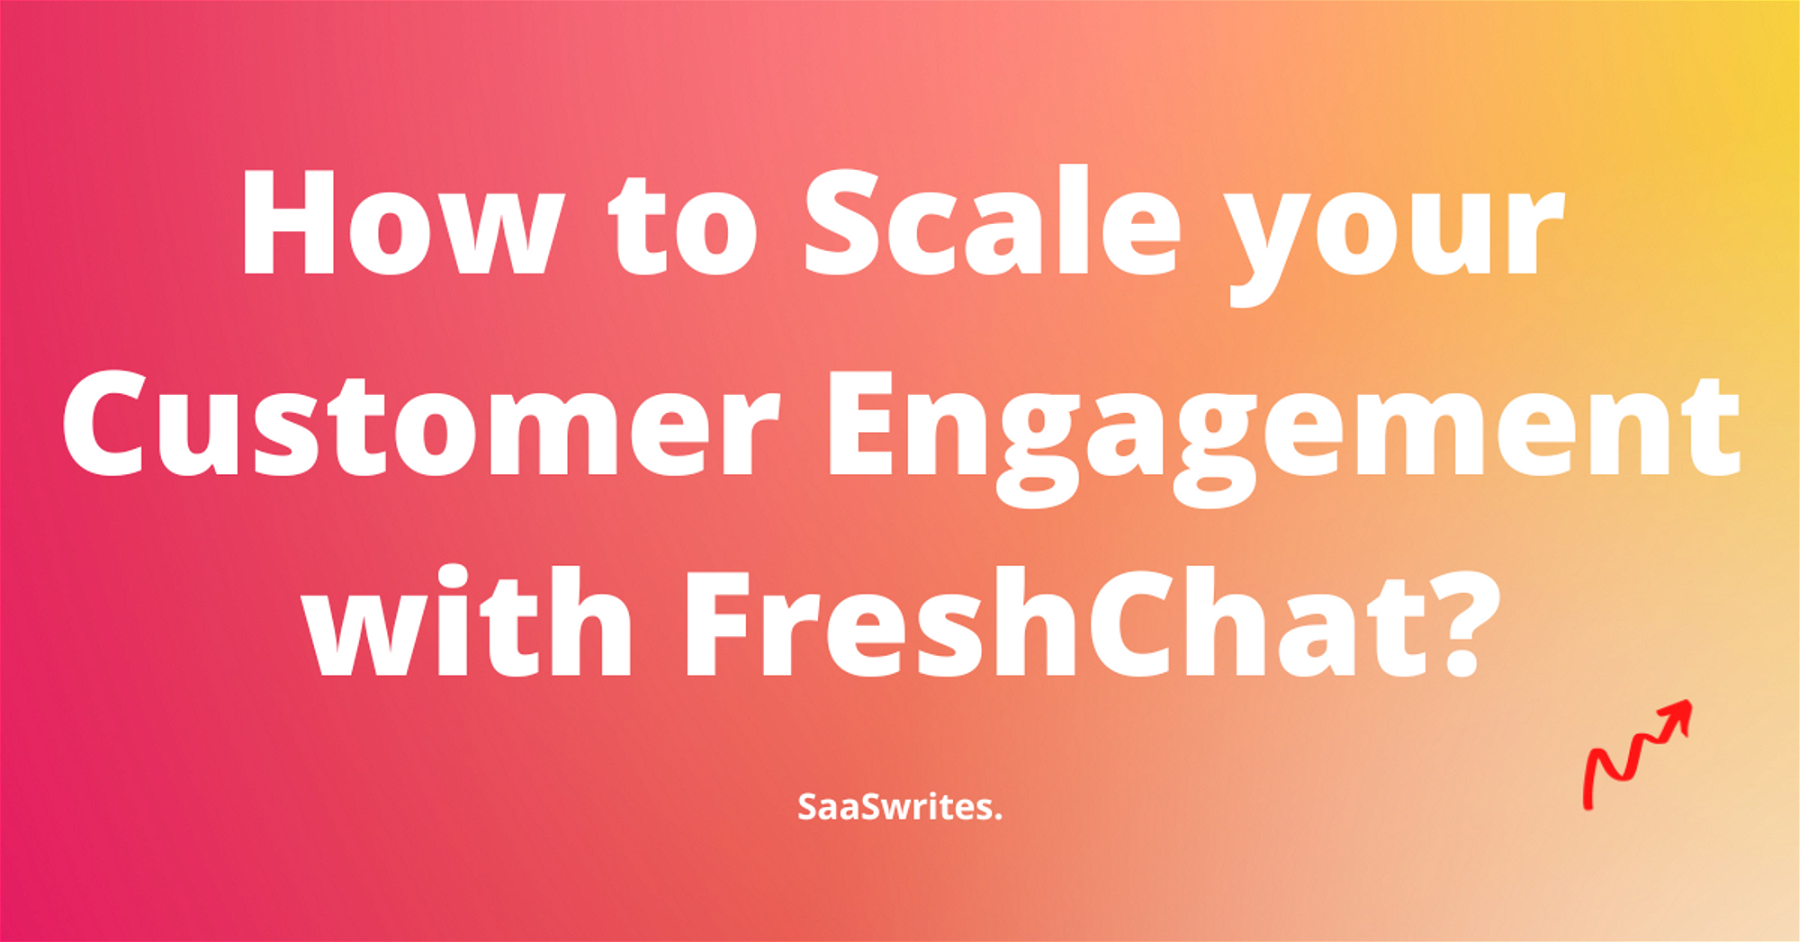 FreshChat: A Campaign to Scale Customer Engagement for Your Business (2023)